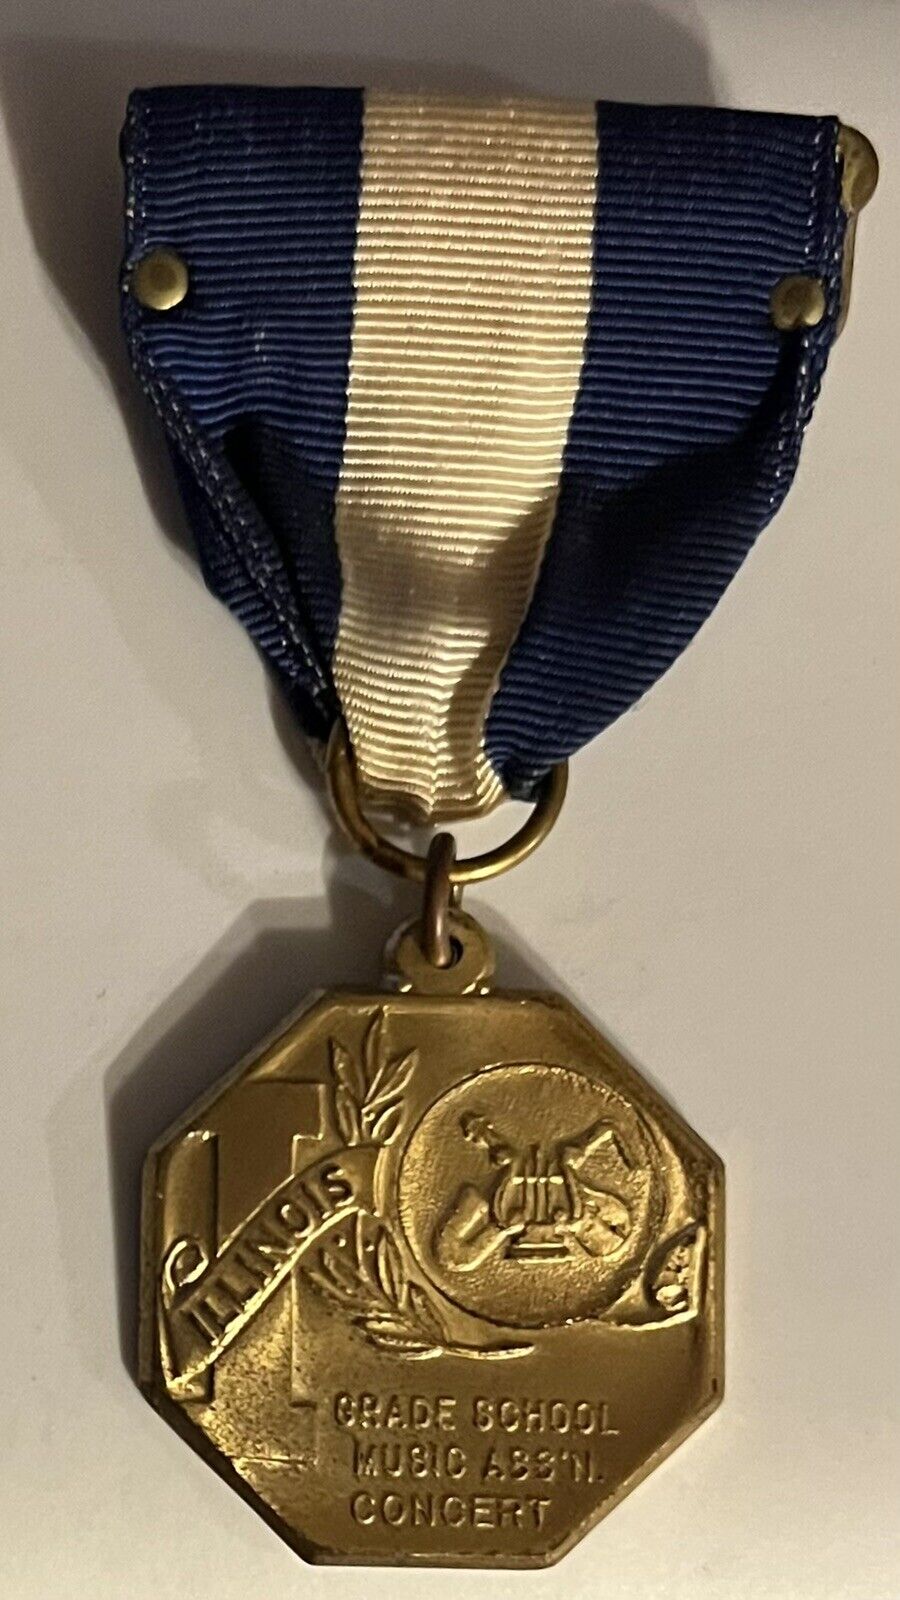 Vintage Illinois District Grade School Music Assocition Concert Medal on Ribbon